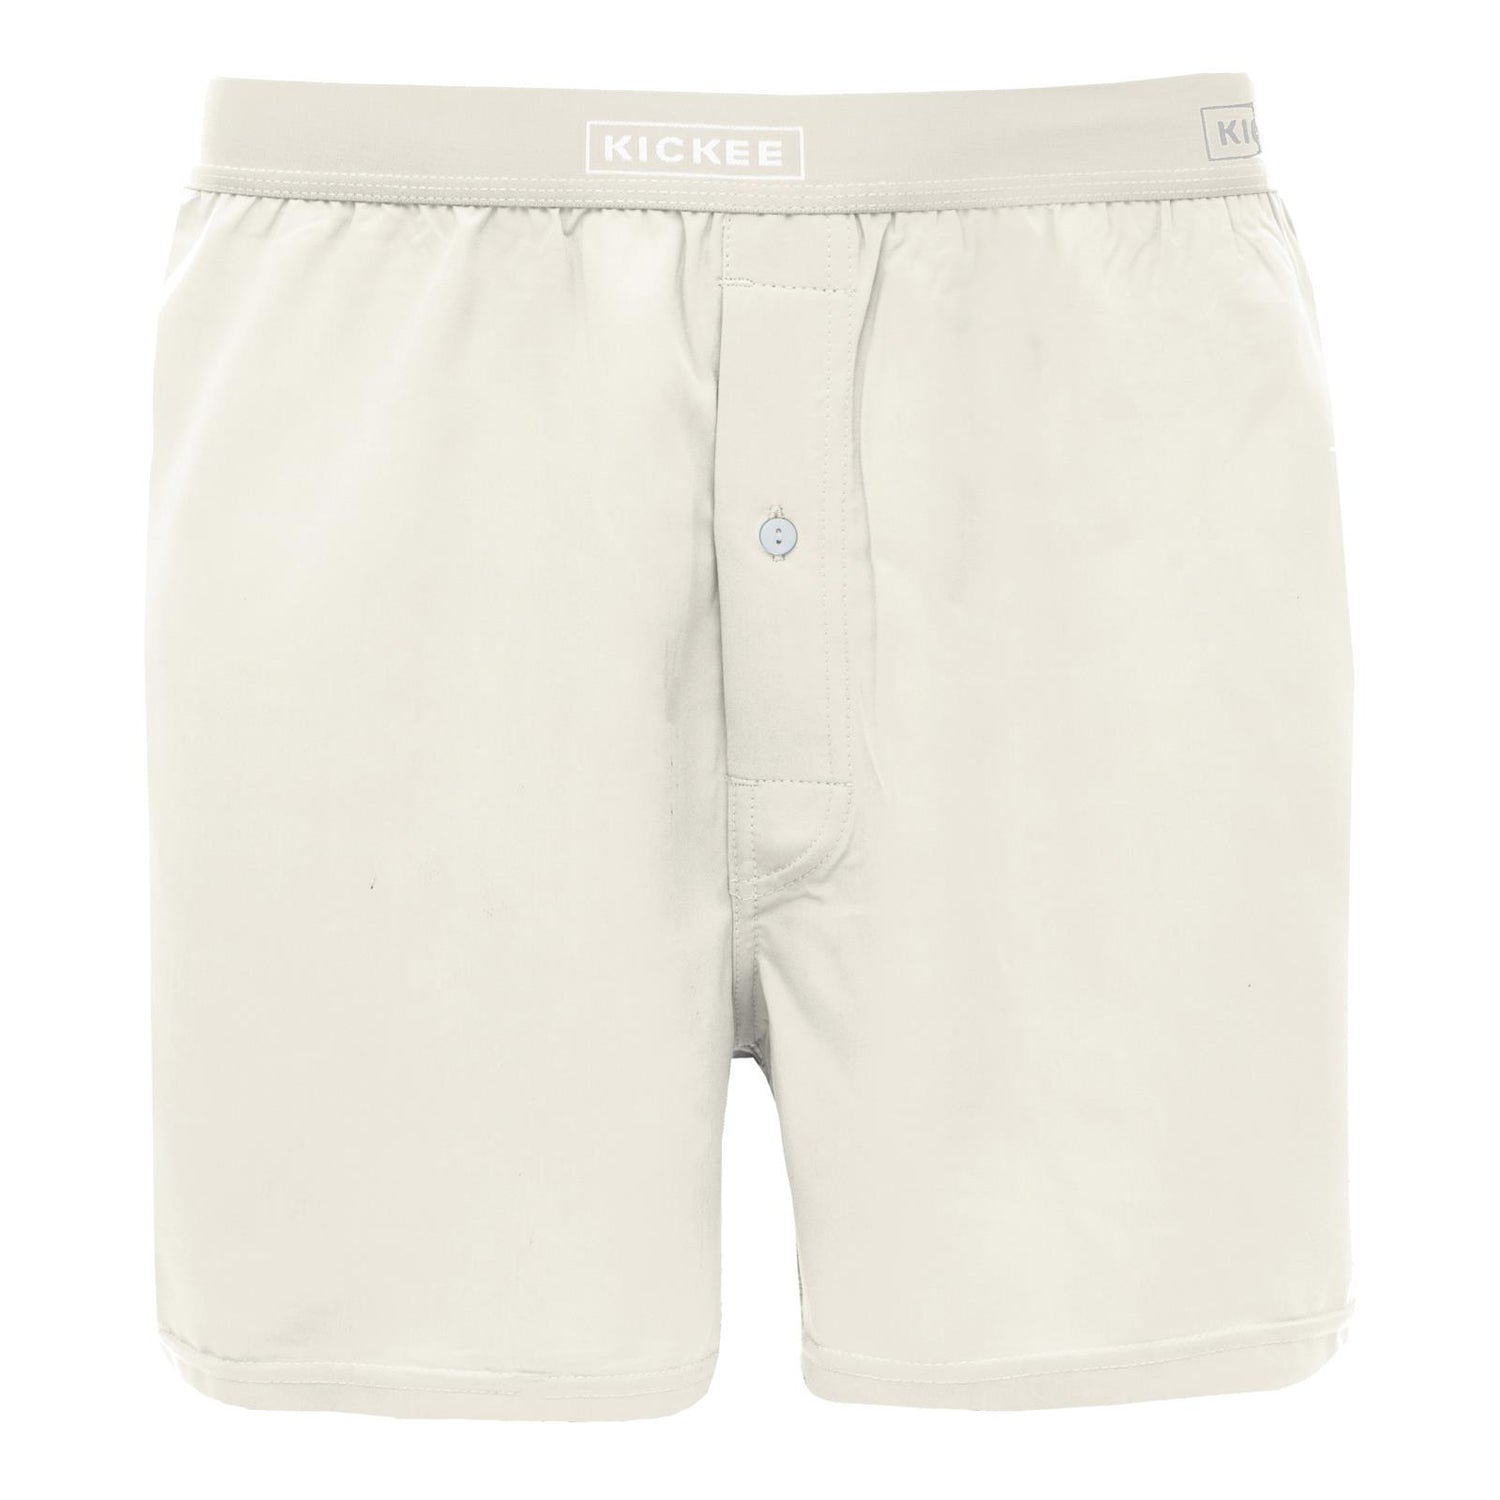 Men's Woven Boxer Shorts in Natural